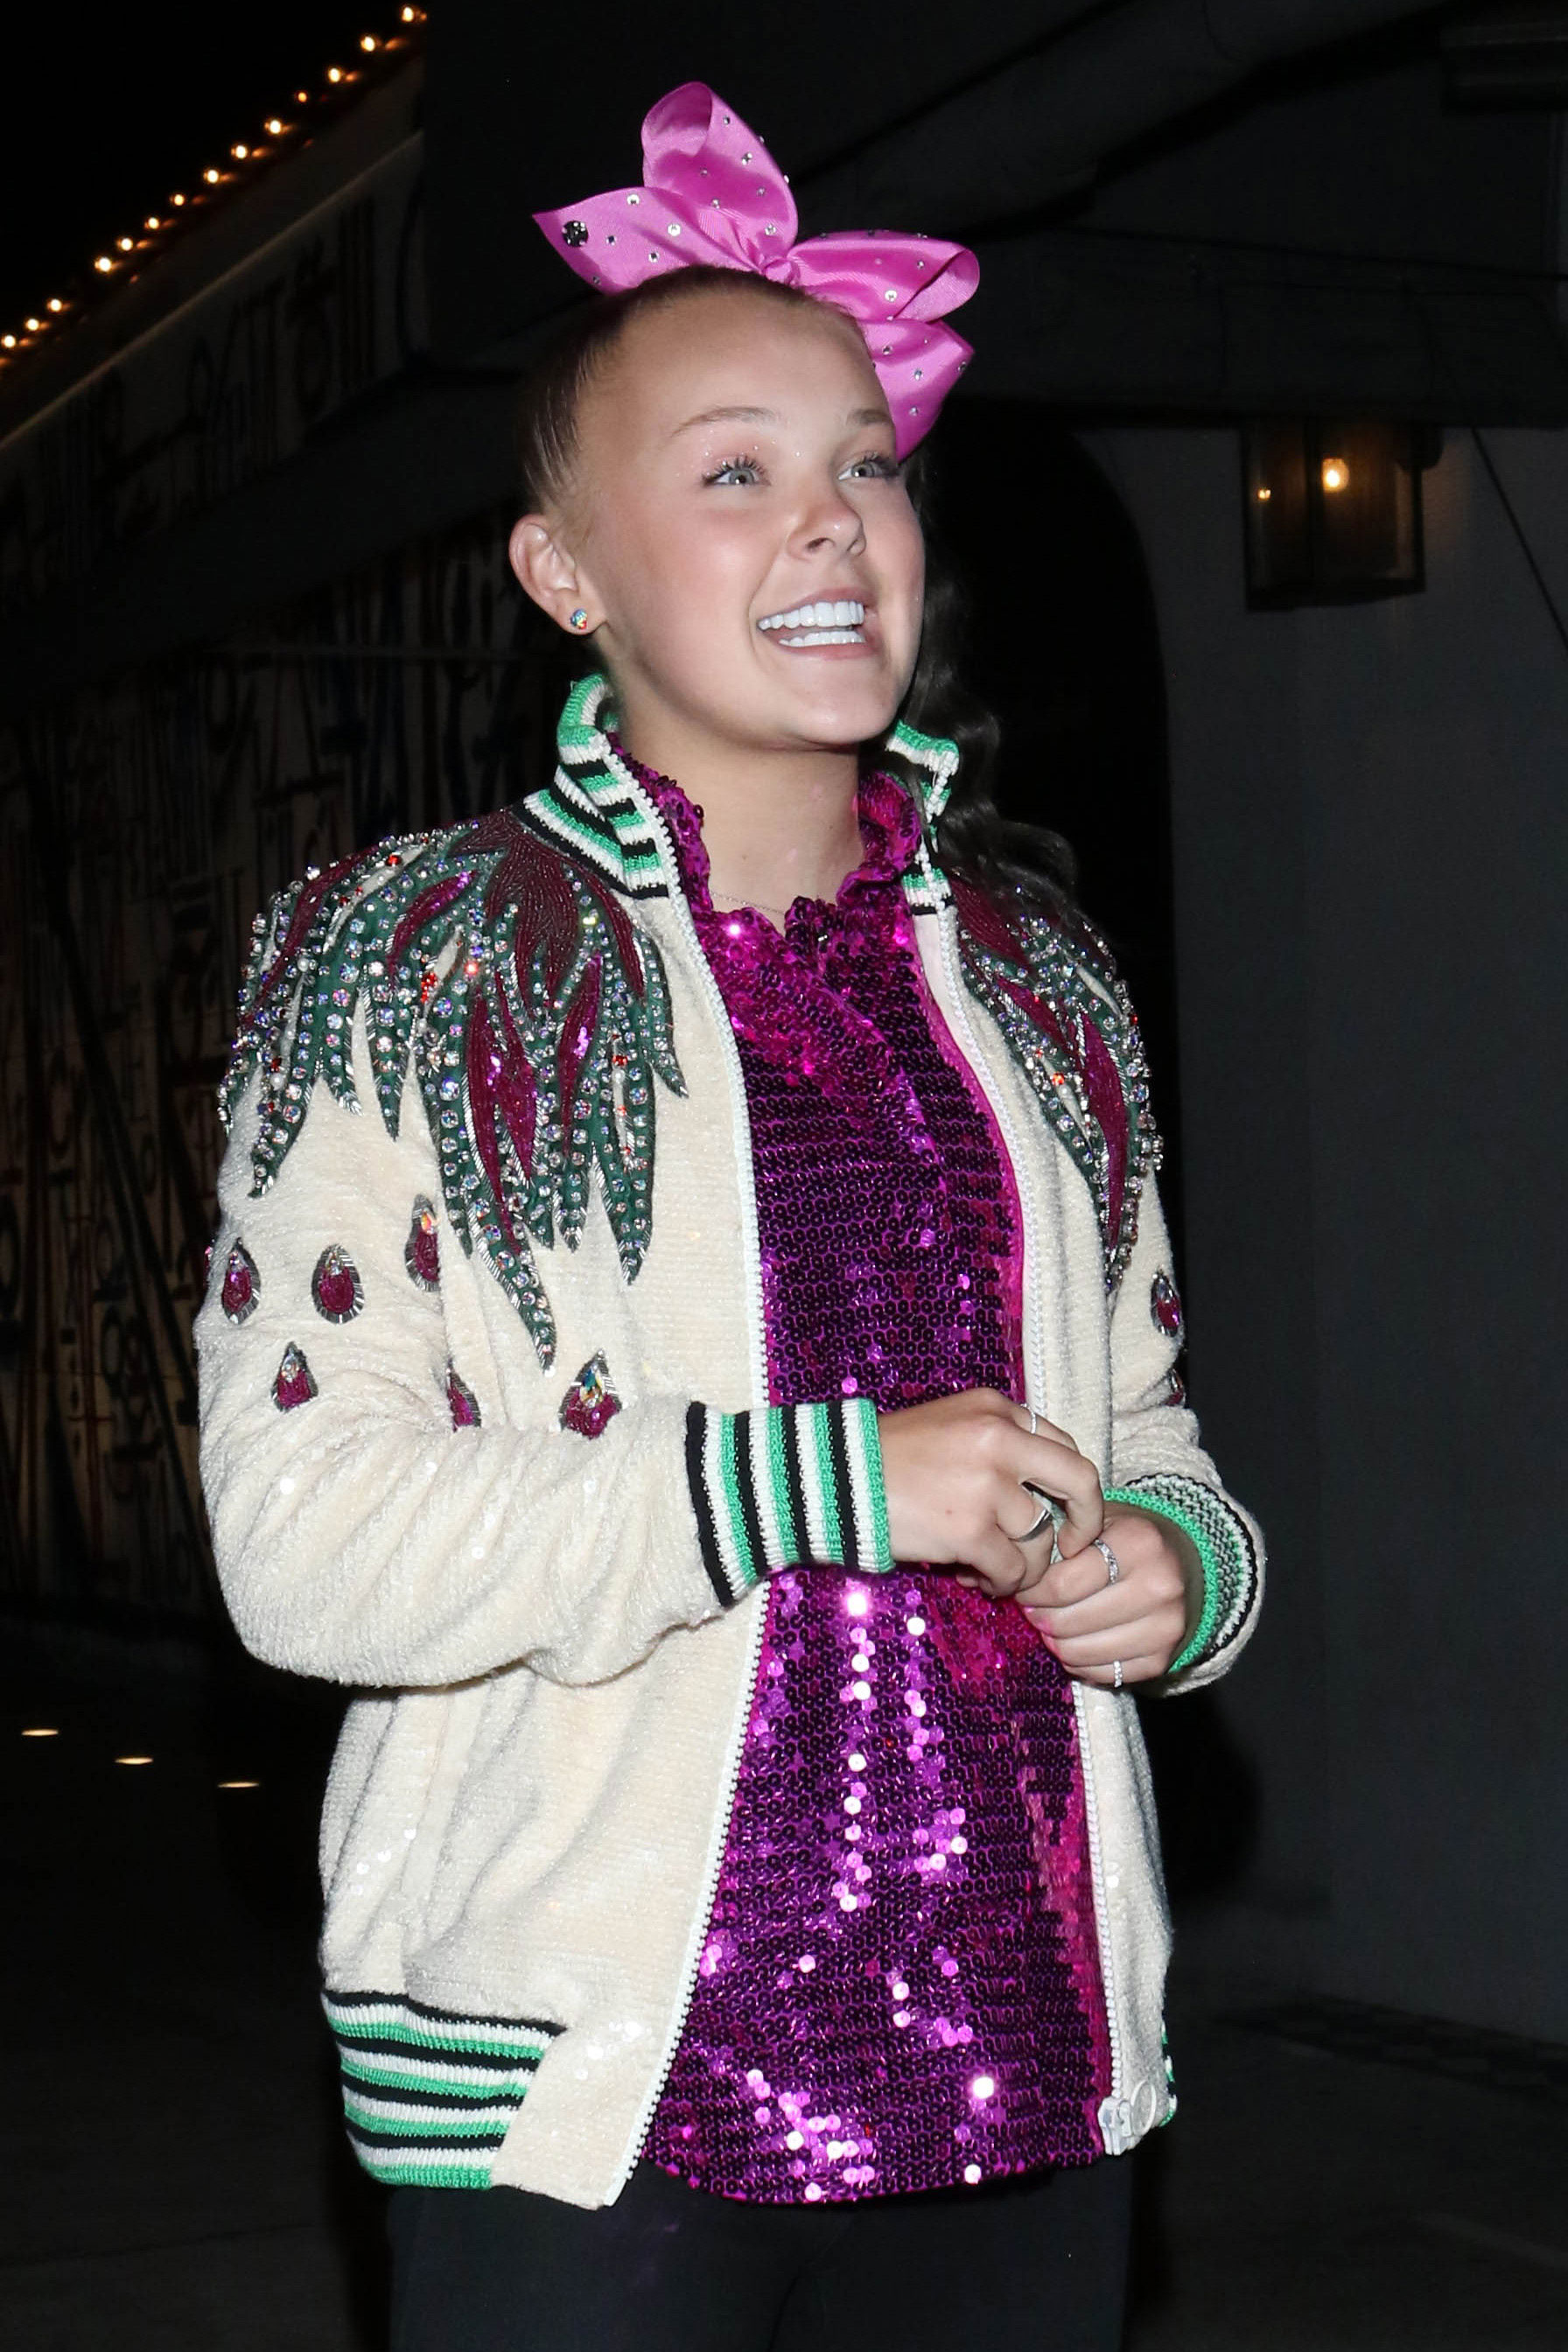 JoJo Siwa Brown Hair: Shows Off Brunette Look During Night Out